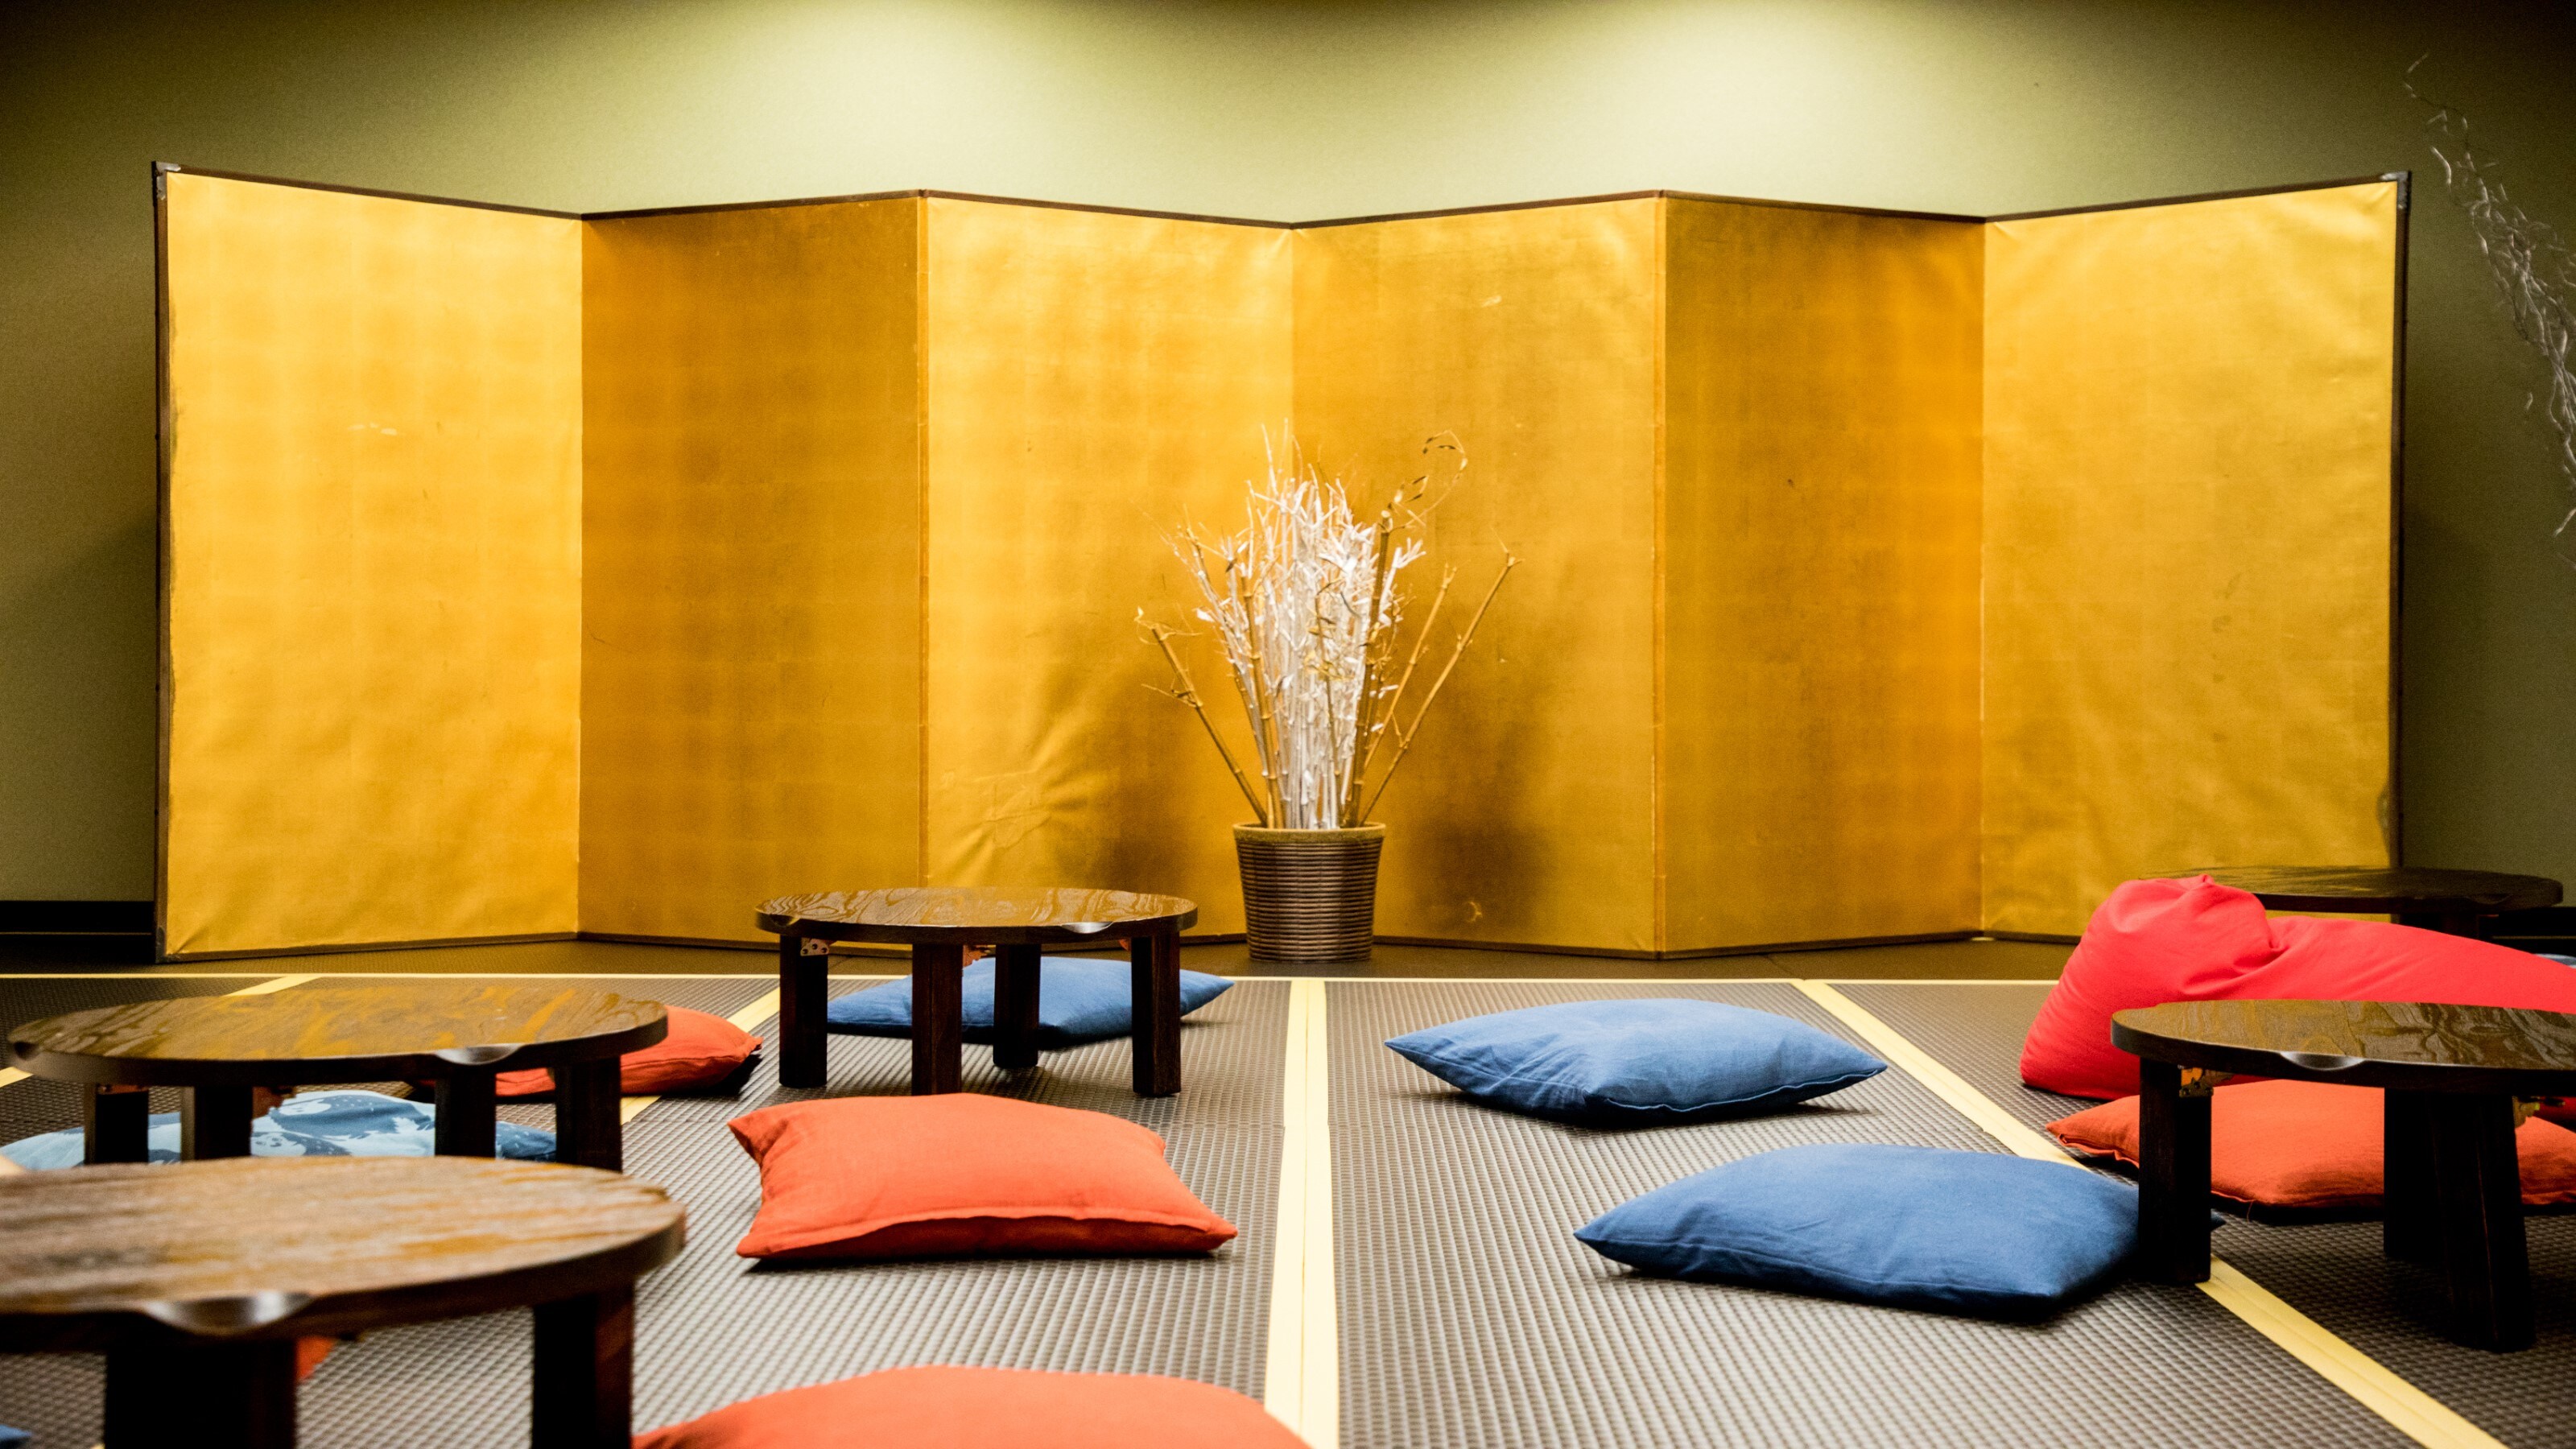 "Yuagedokoro" This is a relaxation room that opened at the end of July 2018.